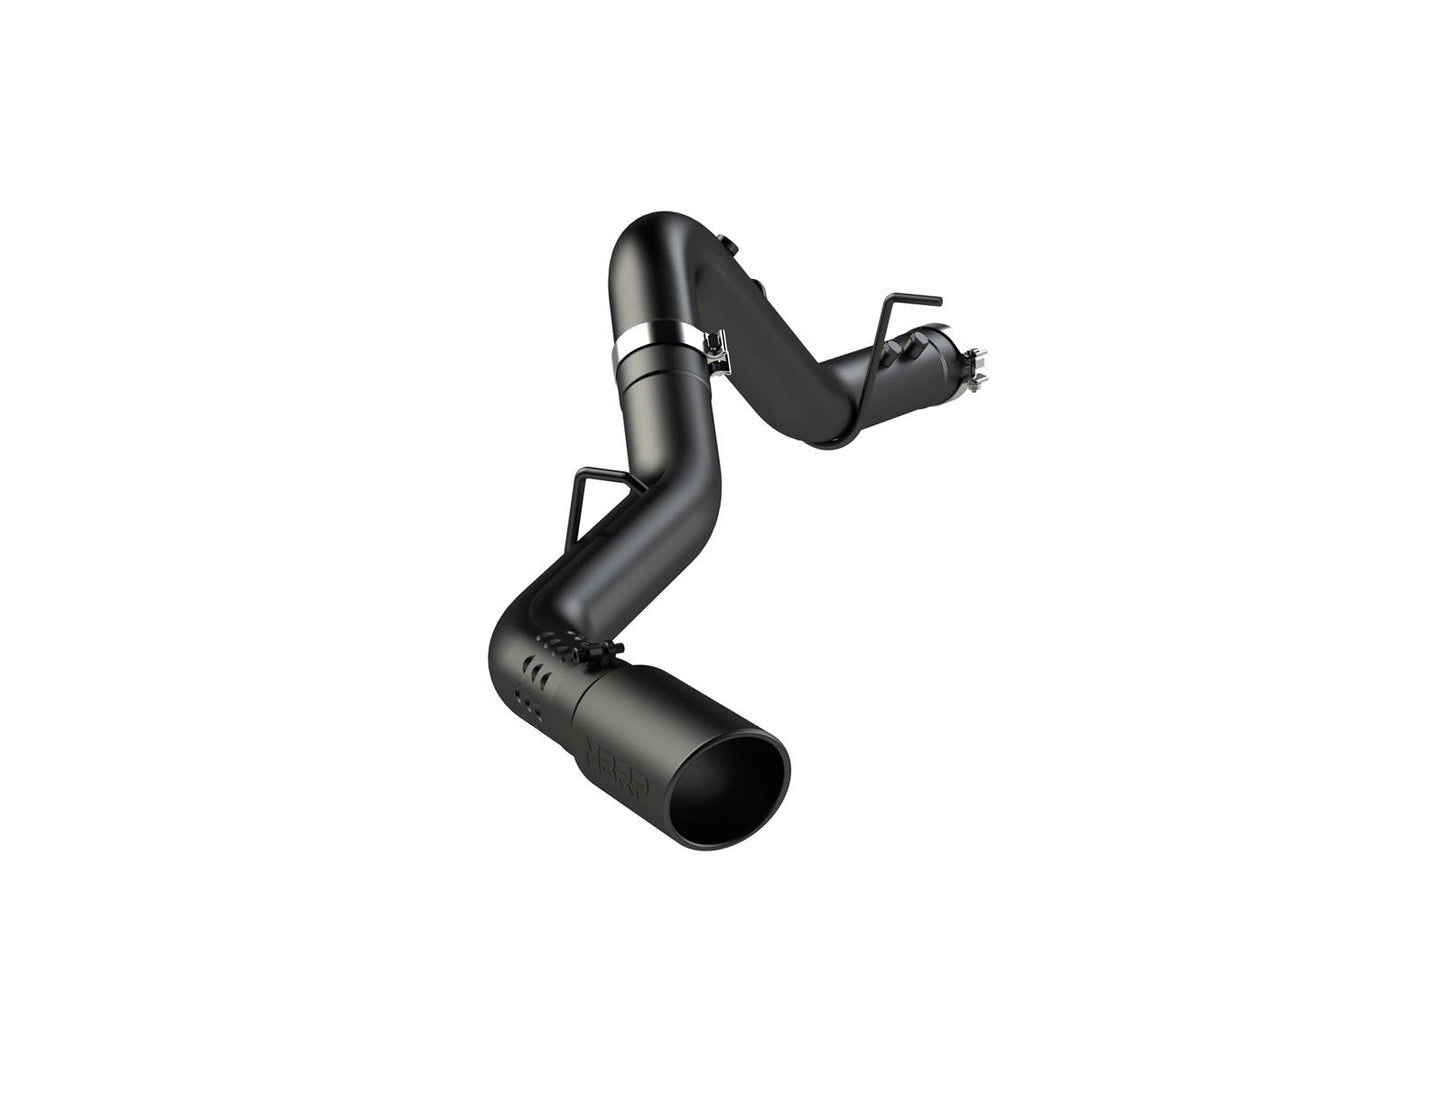 MBRP Installer Series Black 4" DPF Back Exhaust System